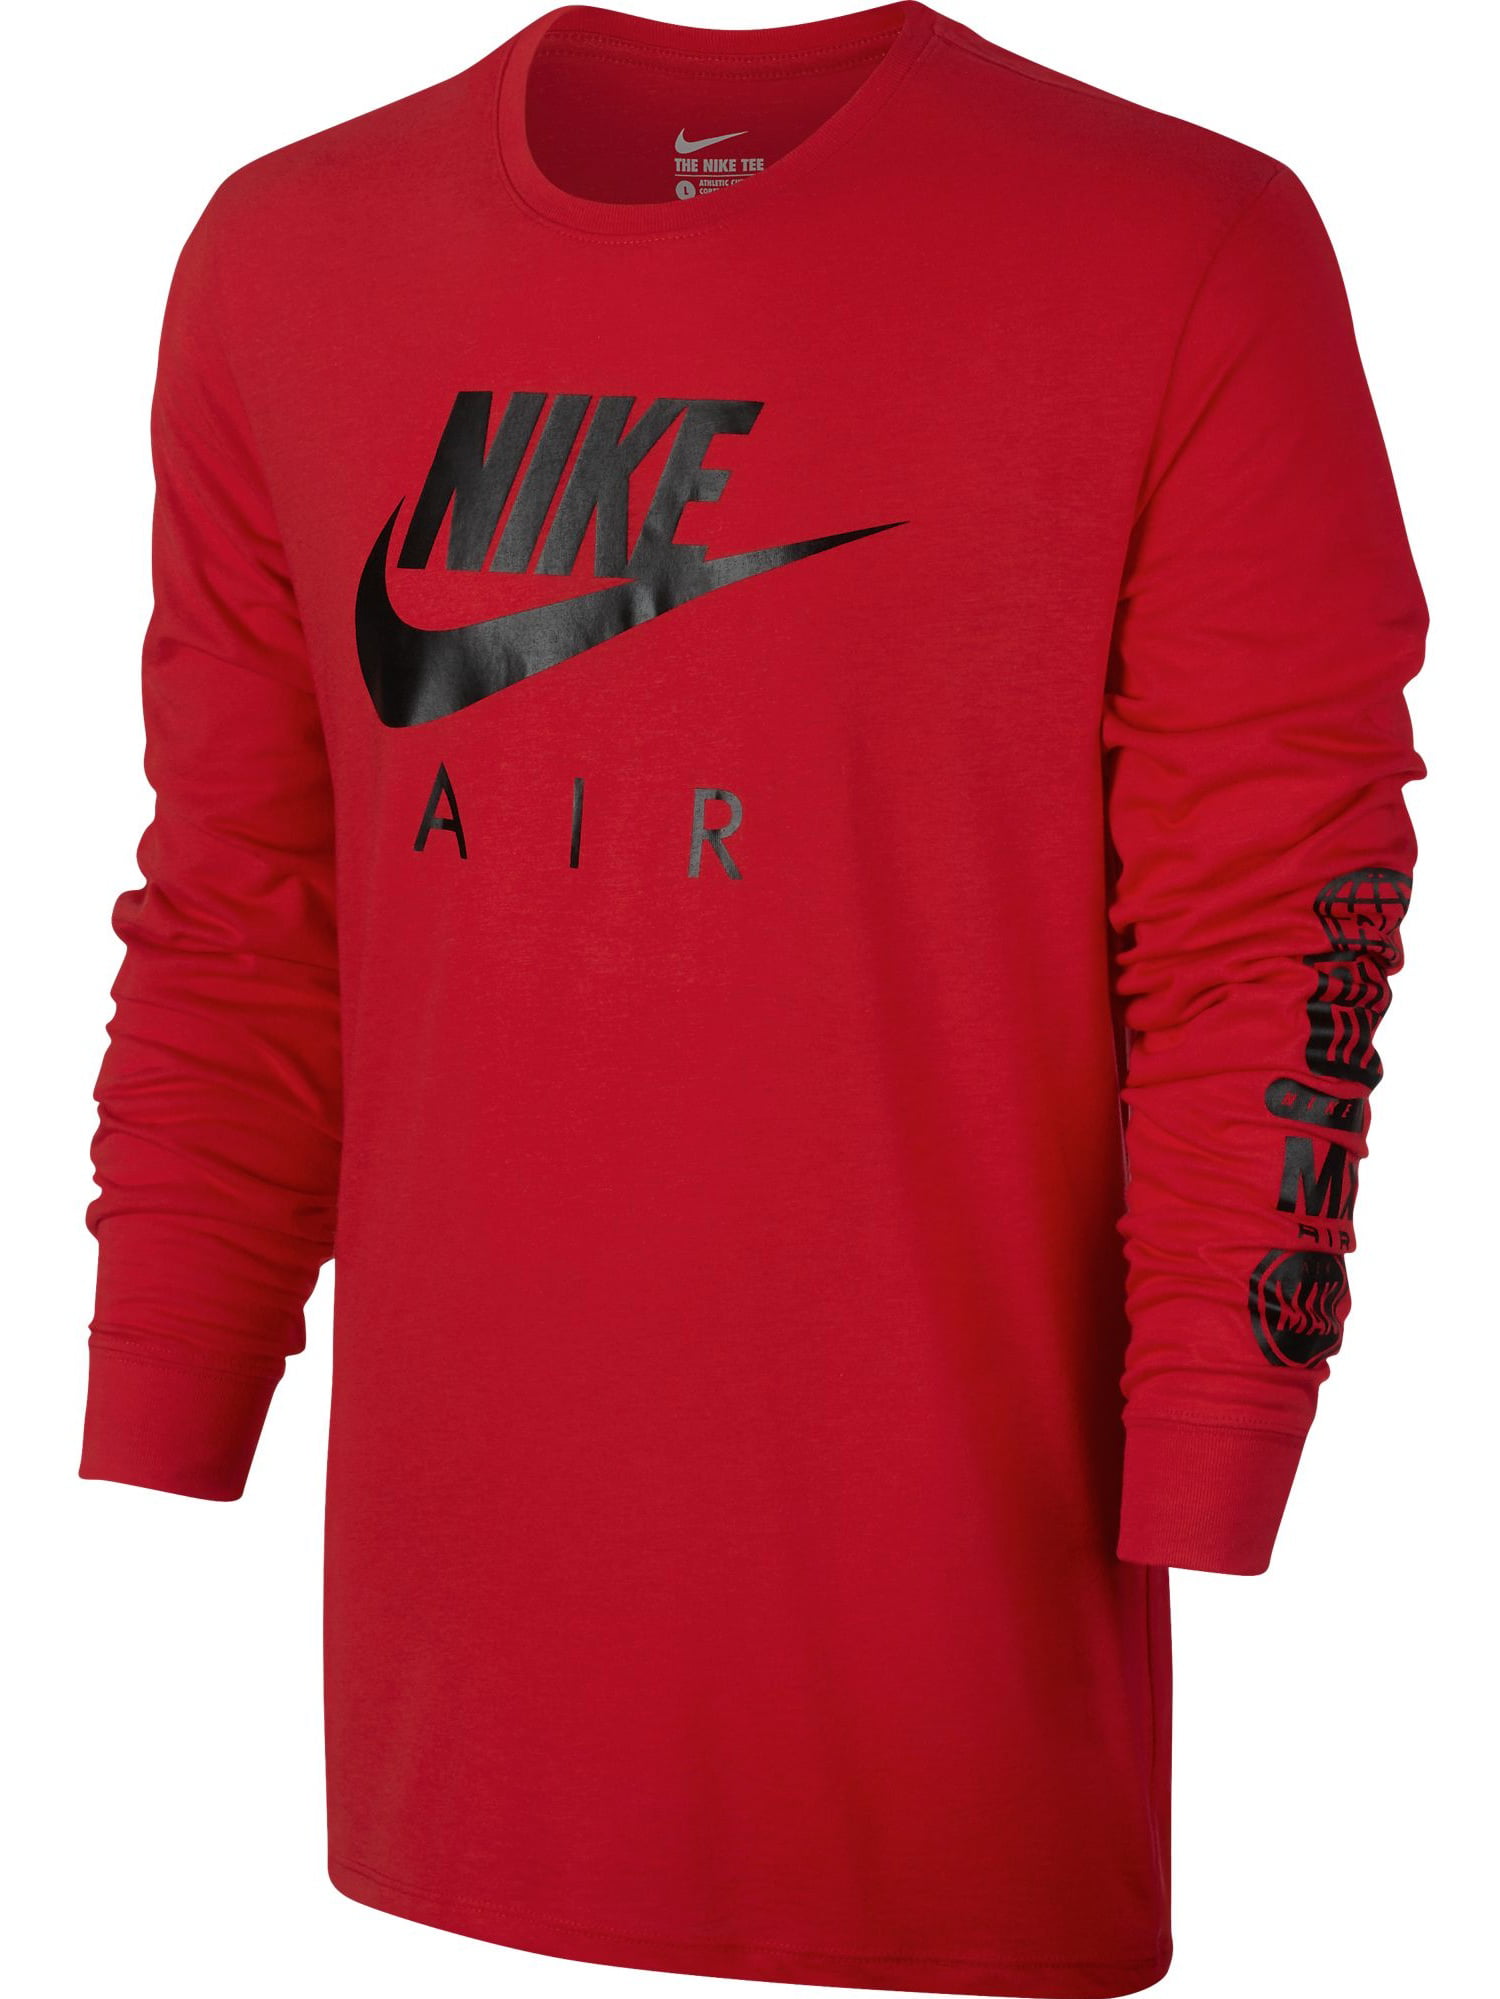 nike shirt red and black